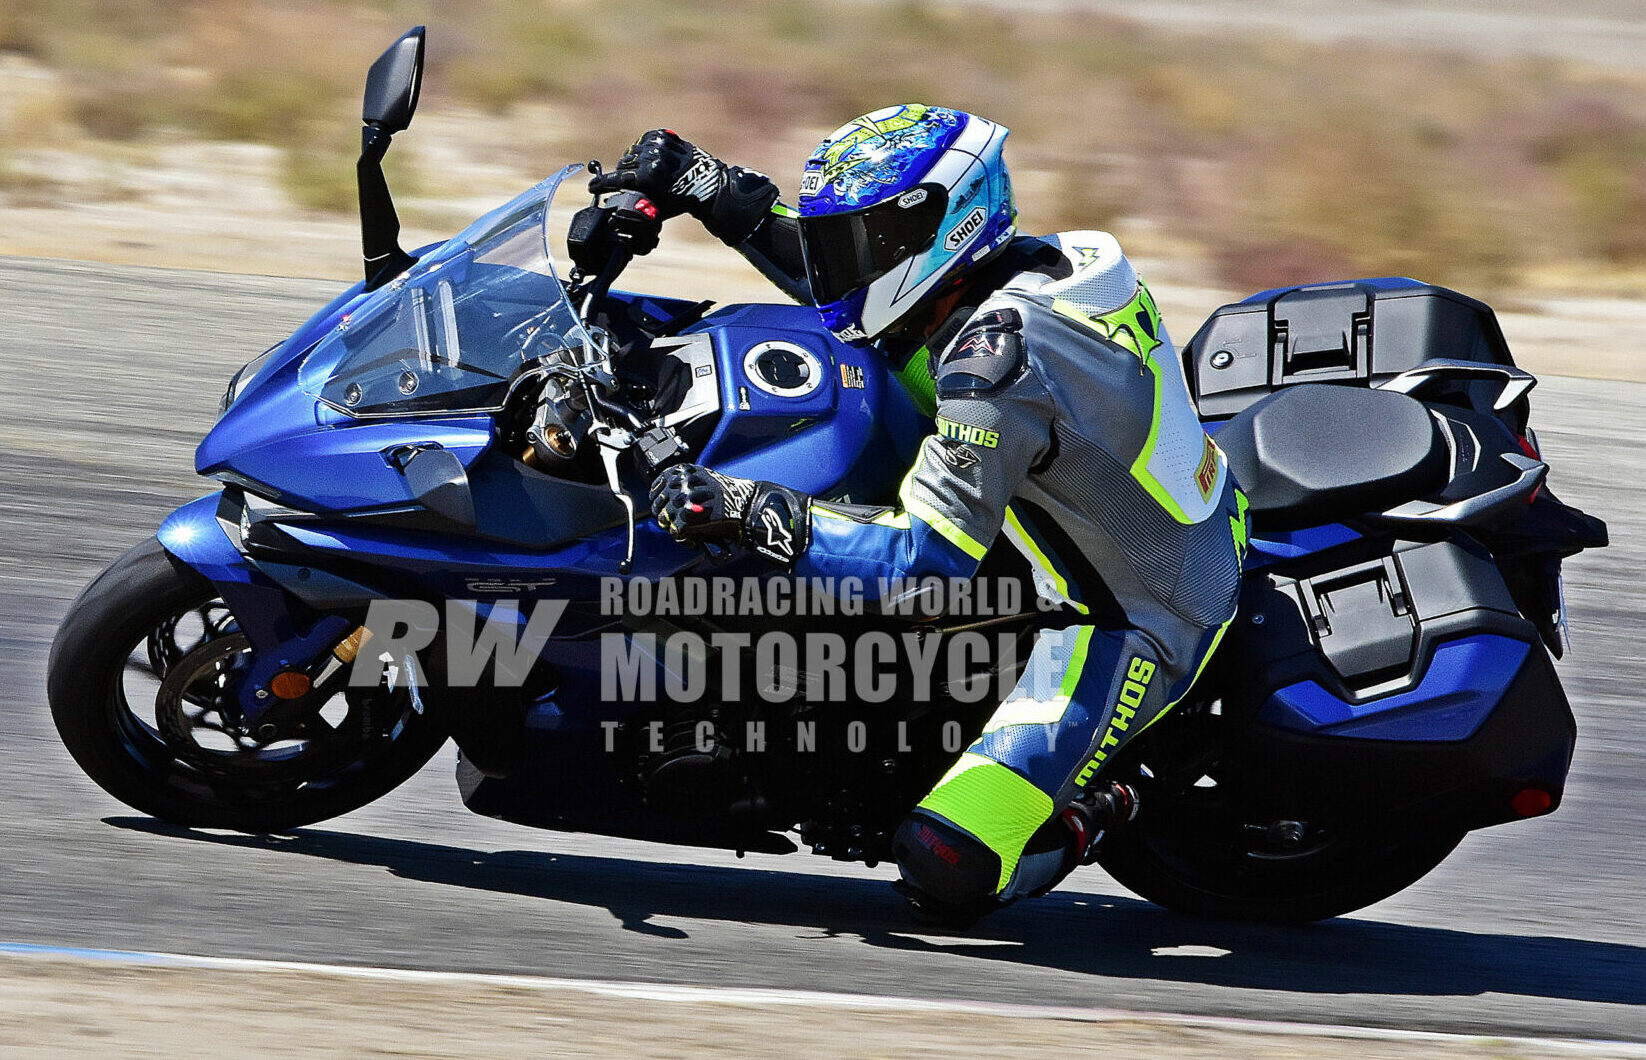 Racer Jeremy Toye and the Suzuki GSX-S1000GT+ on track at Buttonwillow Raceway Park. Photo by Michael Gougis.